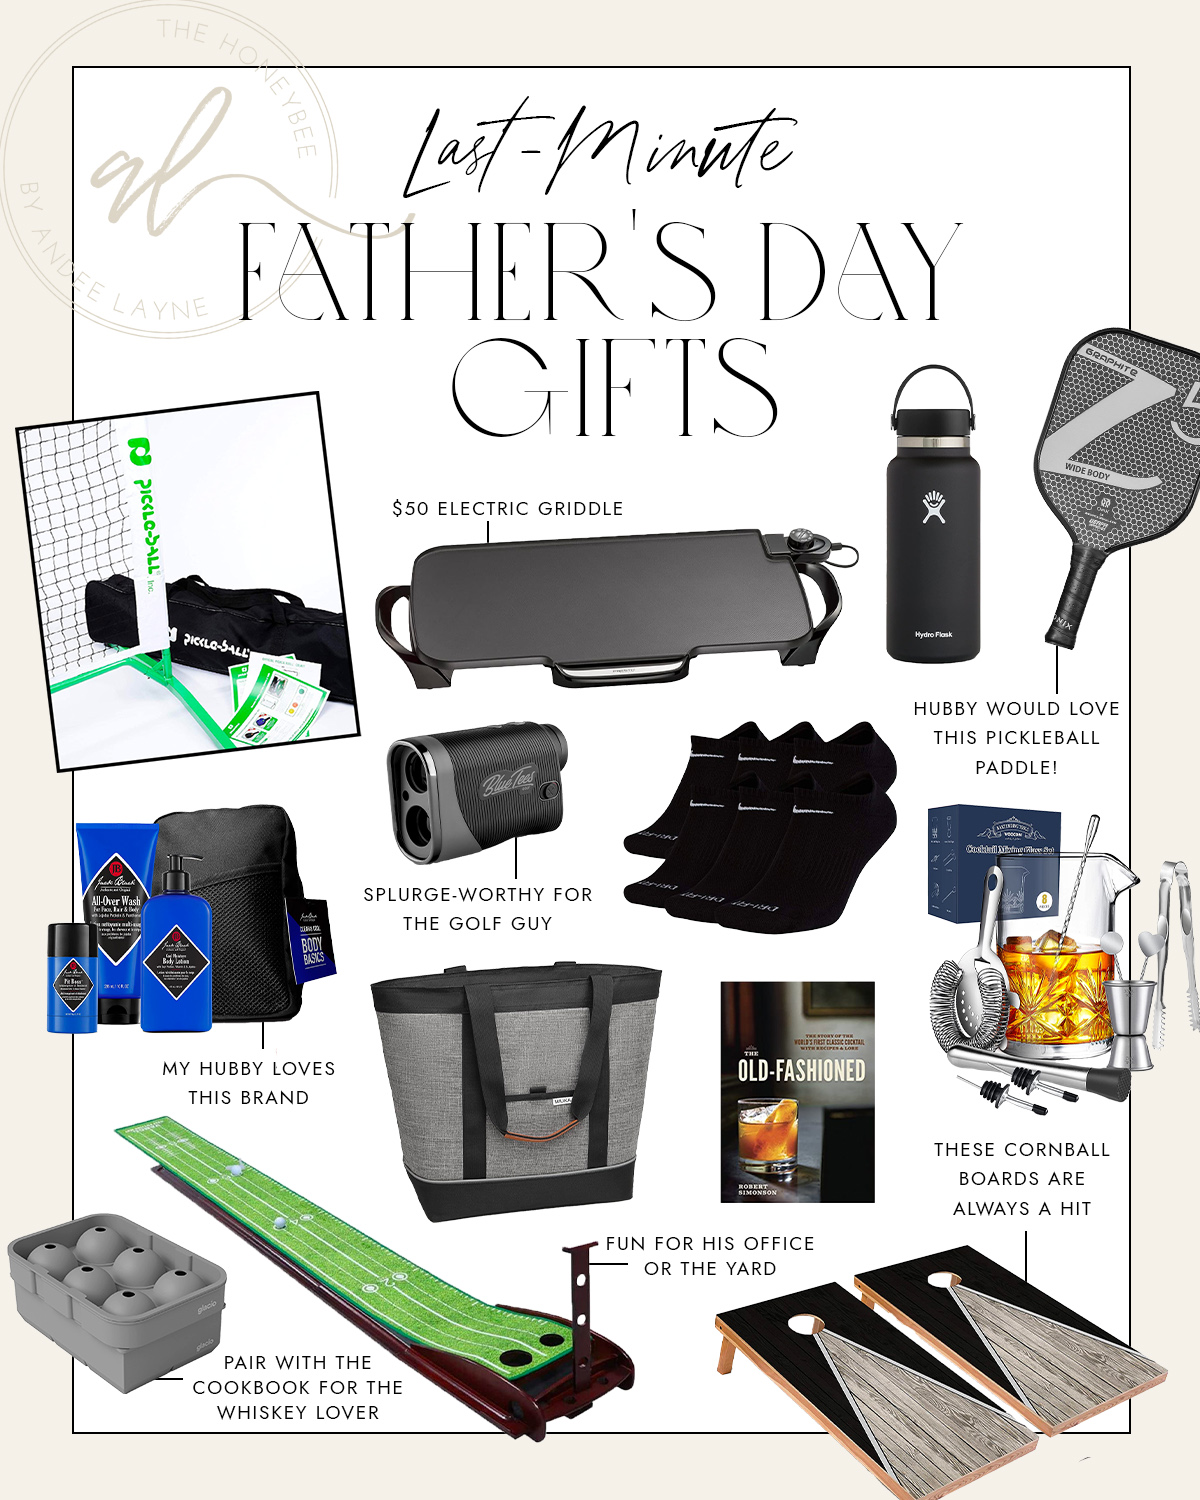 Last-Minute Father's Day Gifts - Andee Layne